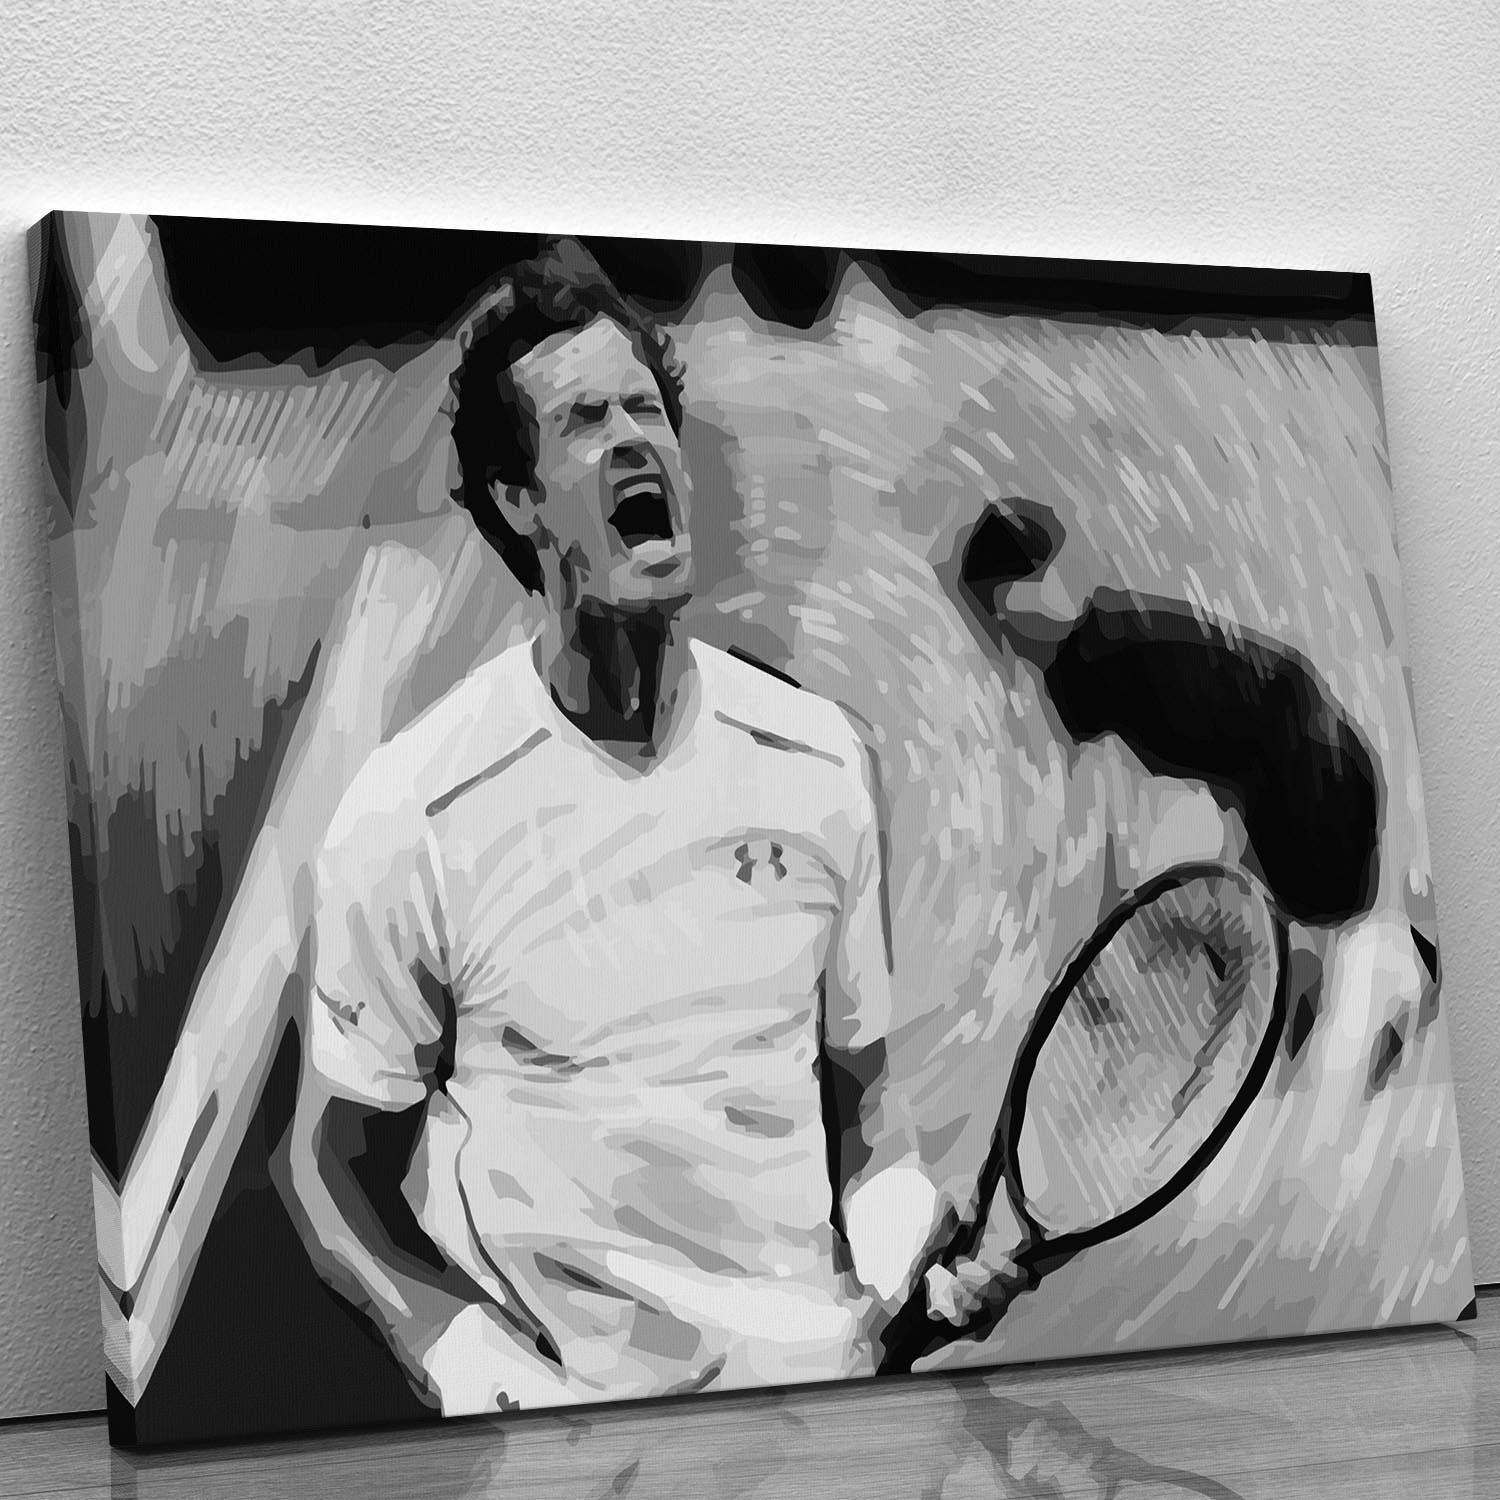 Andy Murray Wimbledon Canvas Print or Poster